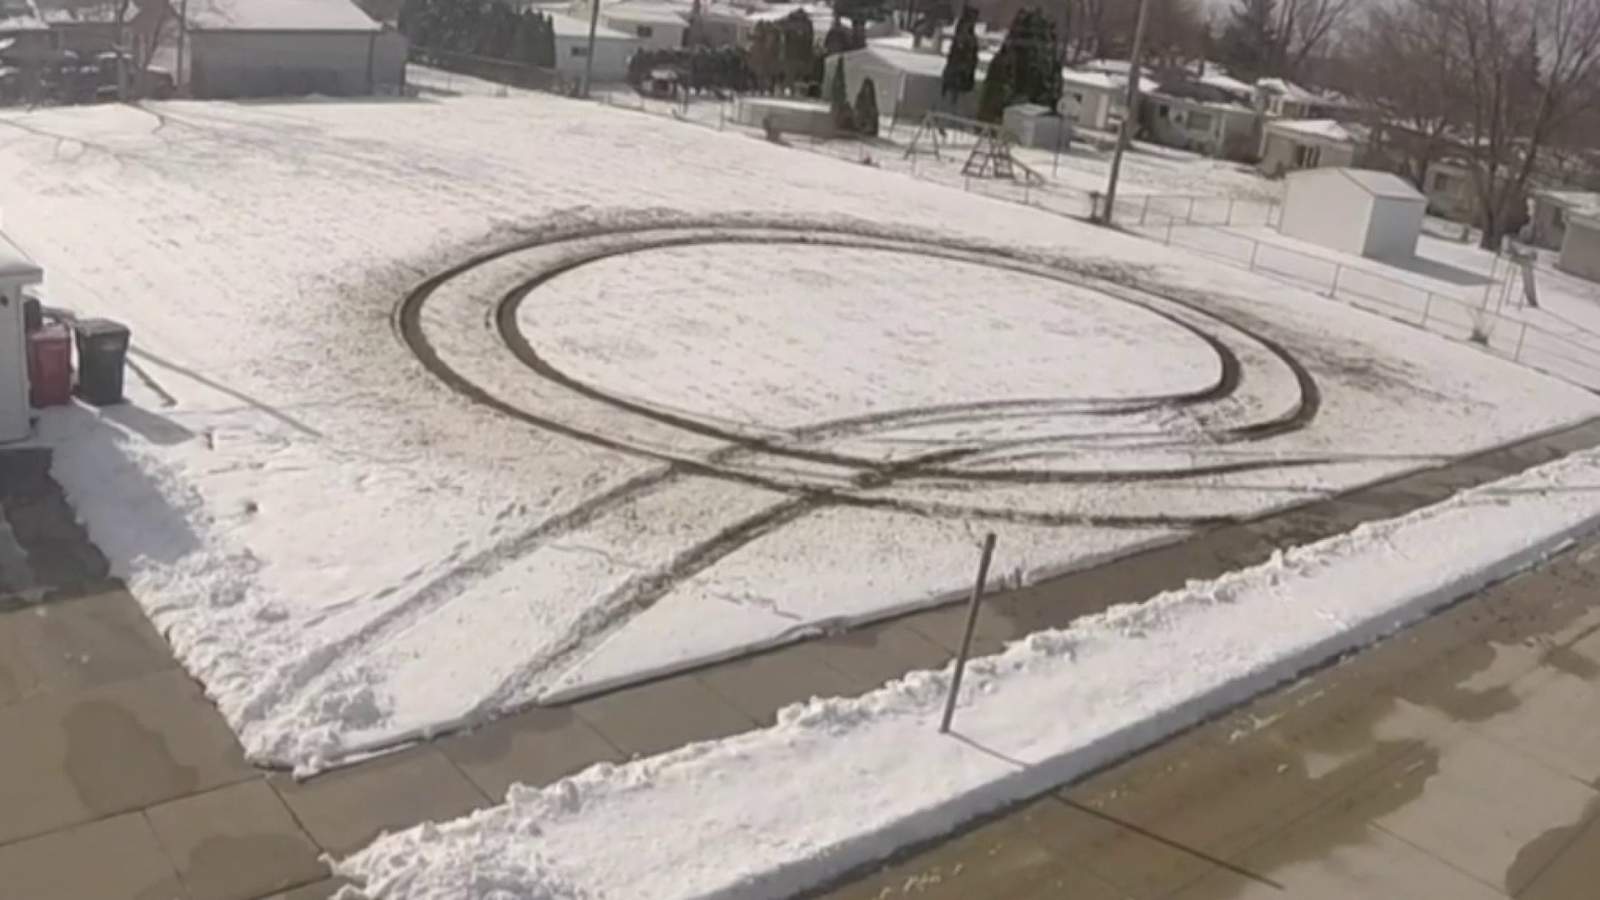 Driver leaves tire tracks in Roseville home’s front yard